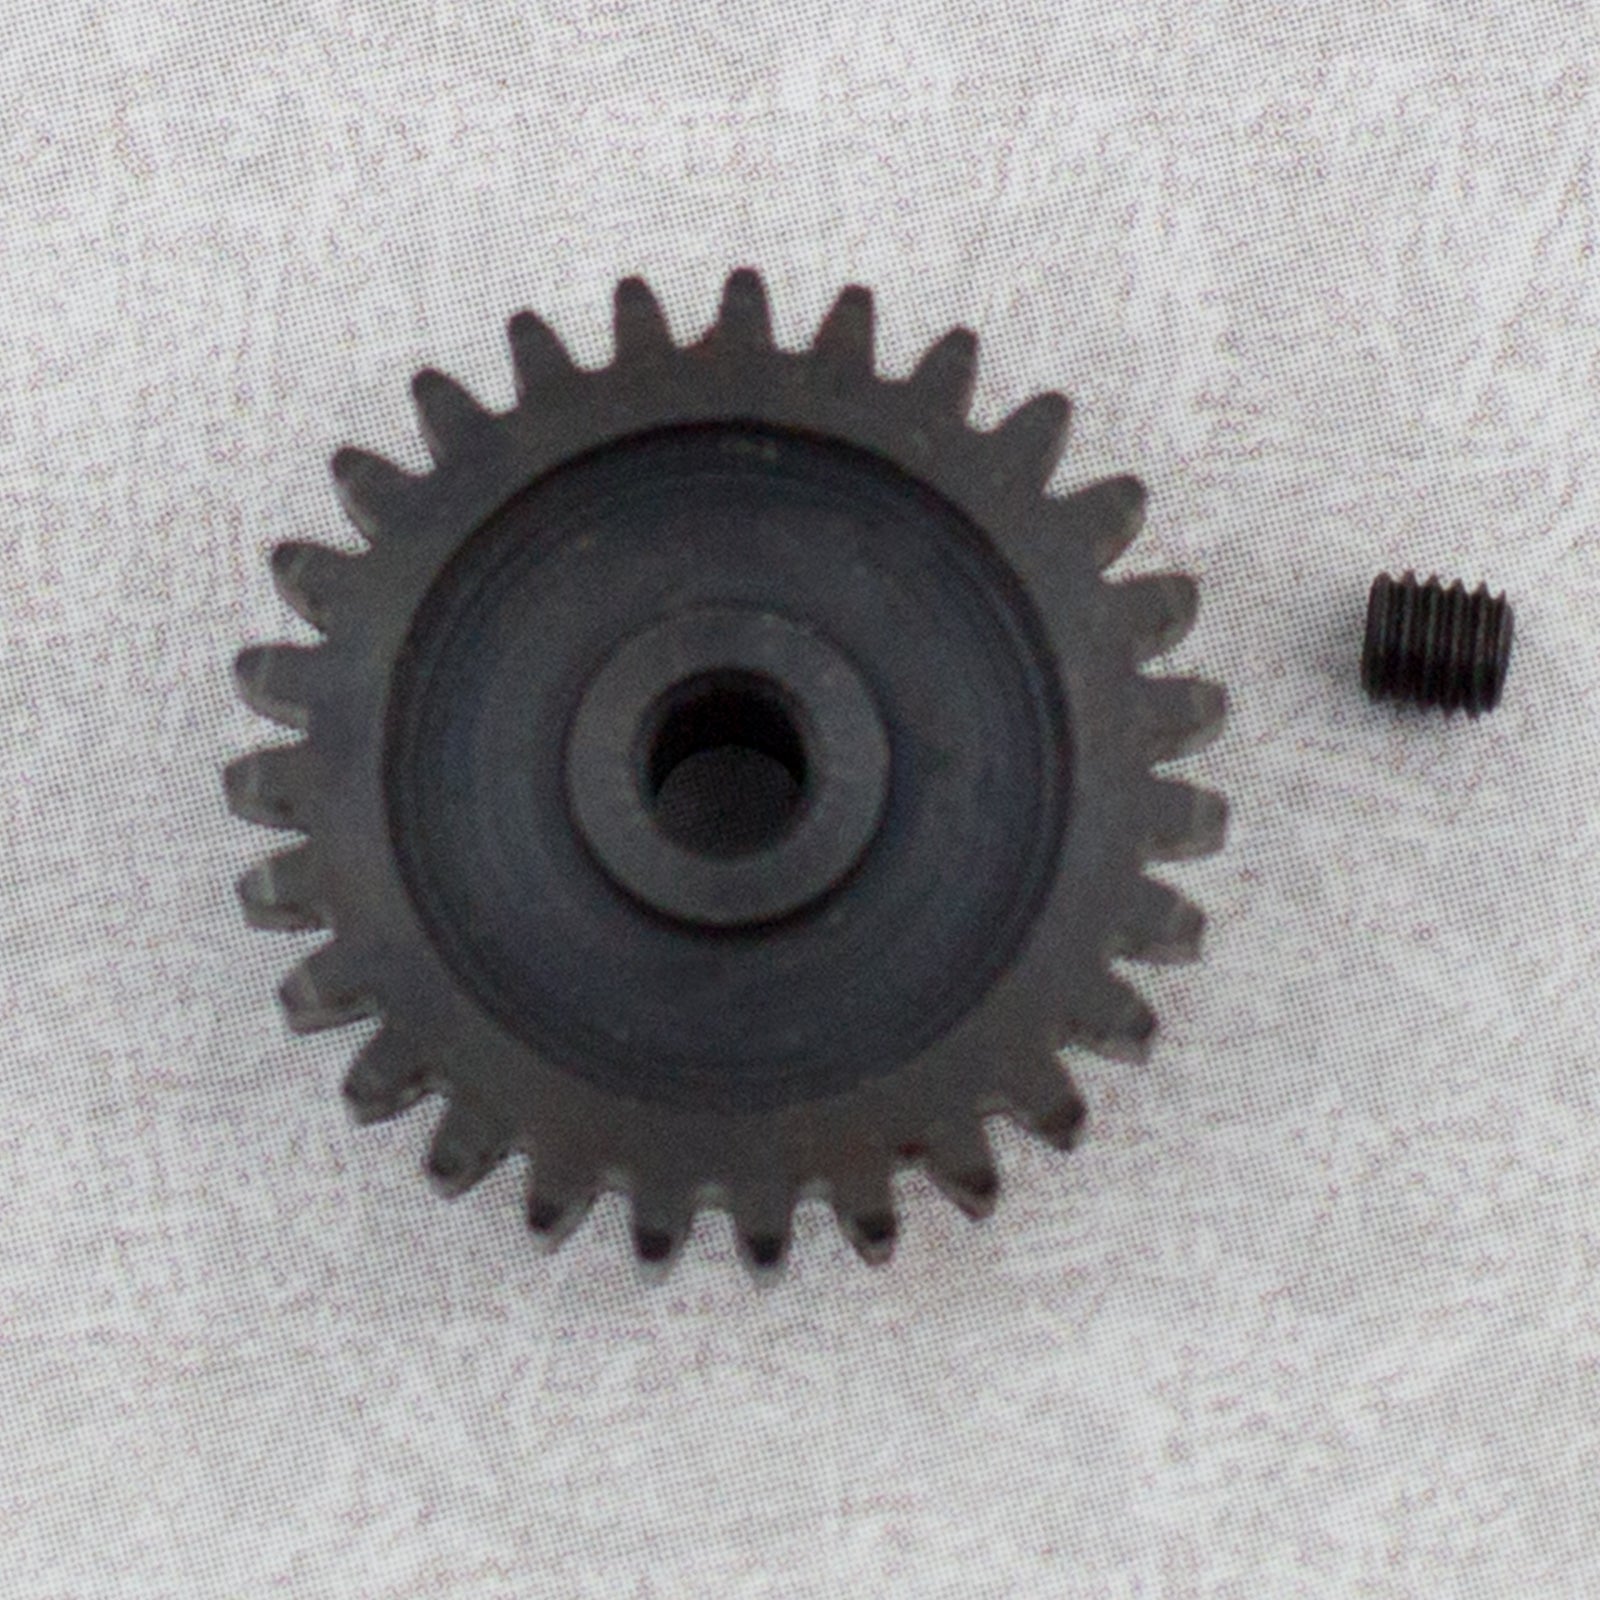 27T Pinion Gear for 540 Motor